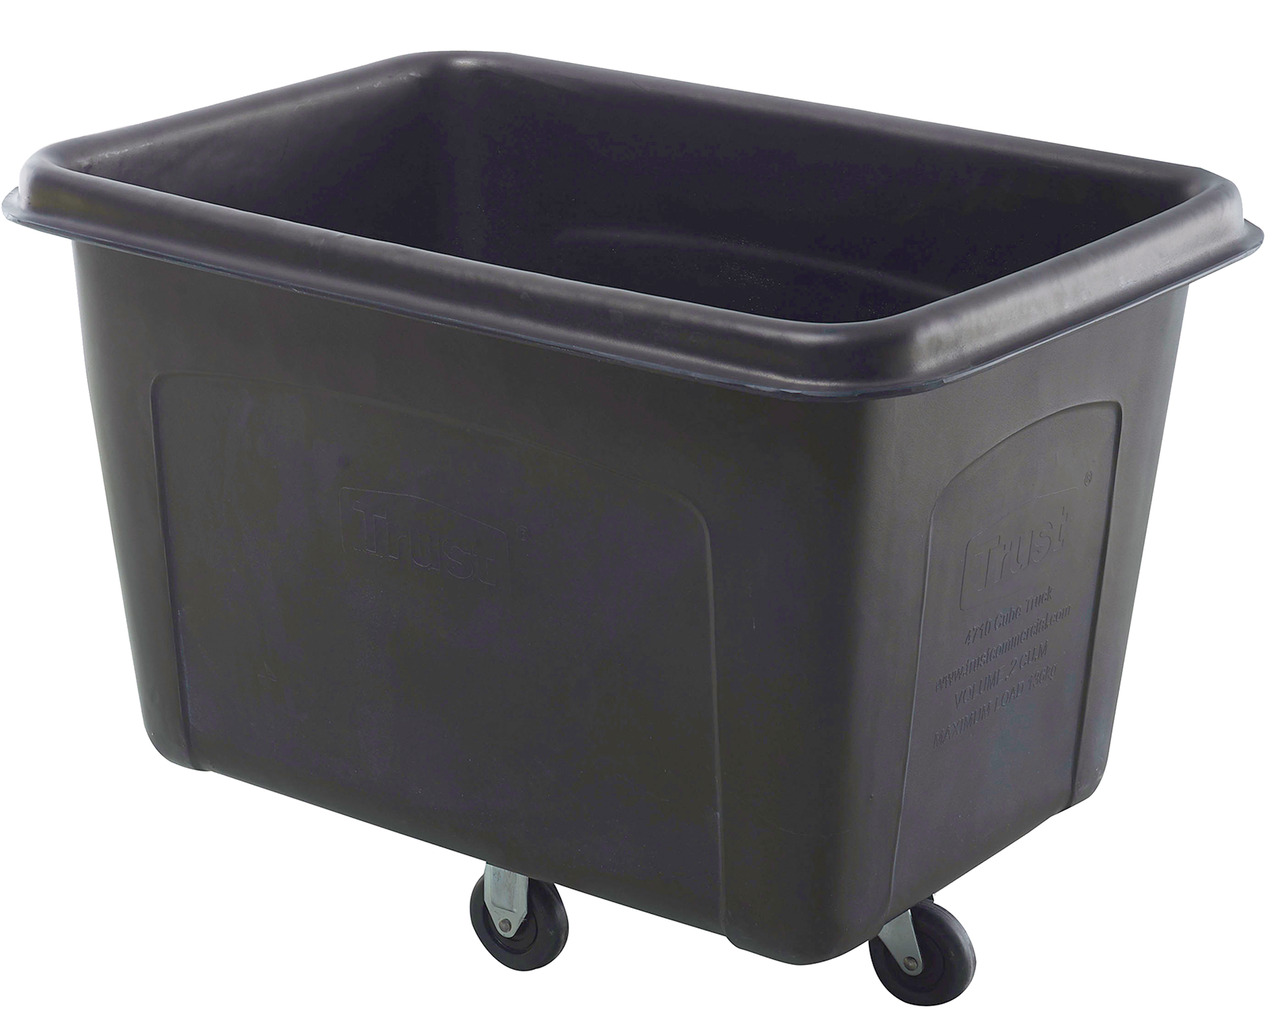 135kg Rated Material handling And Laundry Handling Trolley